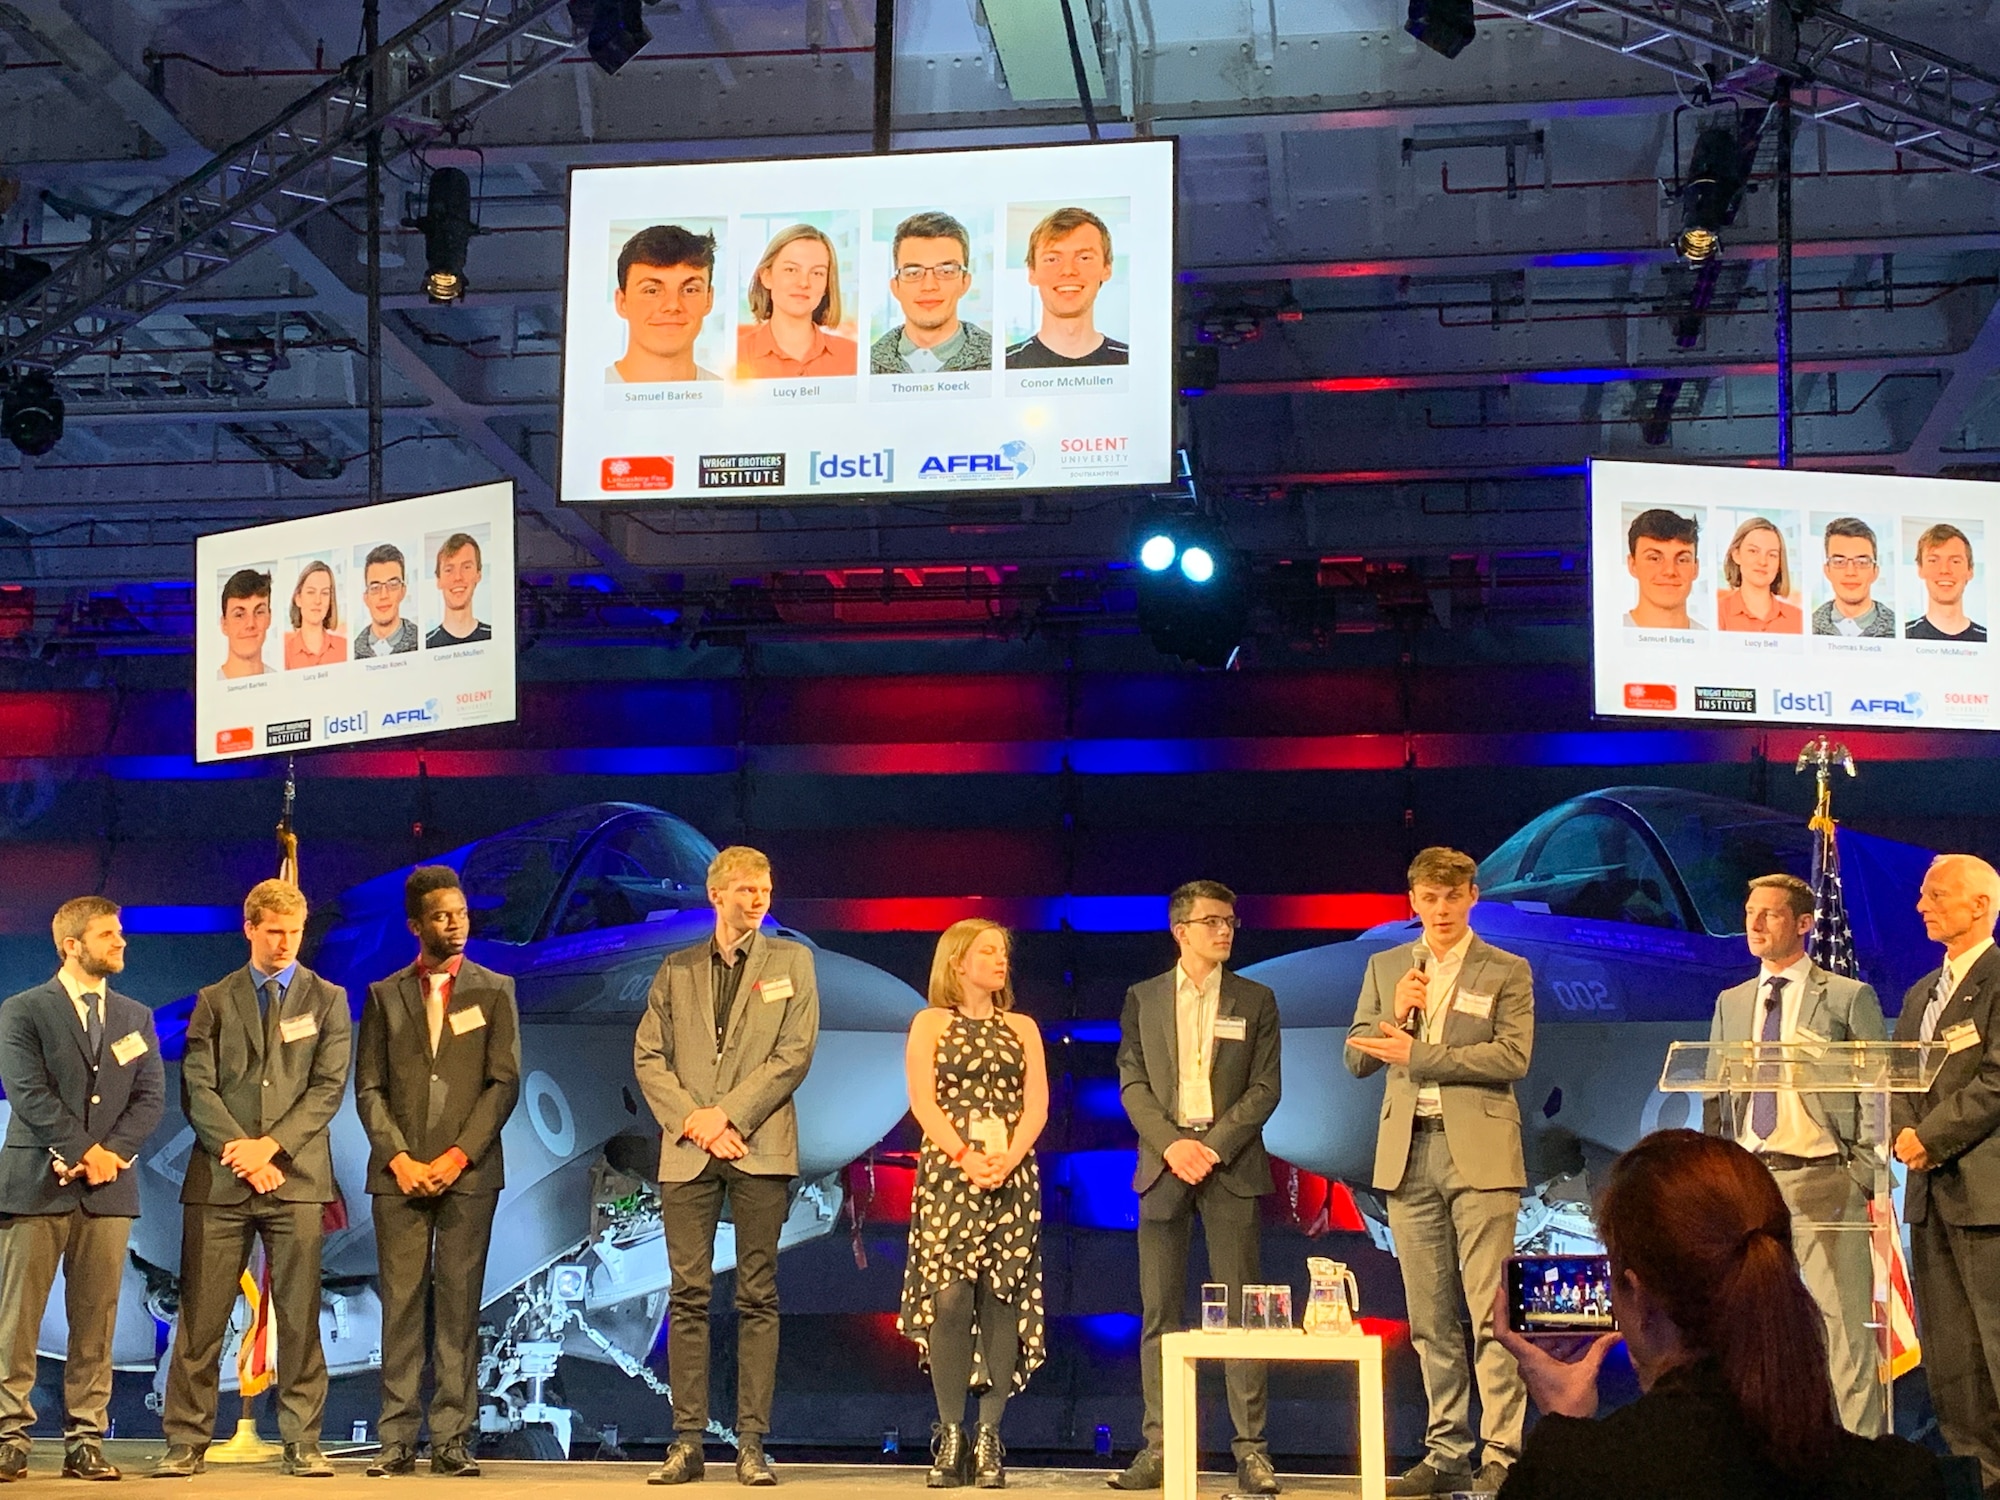 Both “Swarm and Search AI Challenge: 2019 Fire Hack” first-place teams on stage with Timothy Wright, DSTL’s Aerospace Systems Group Leader, second from right, and Mick Hitchcock, AFRL Program Manager, far right. (Courtesy photo)